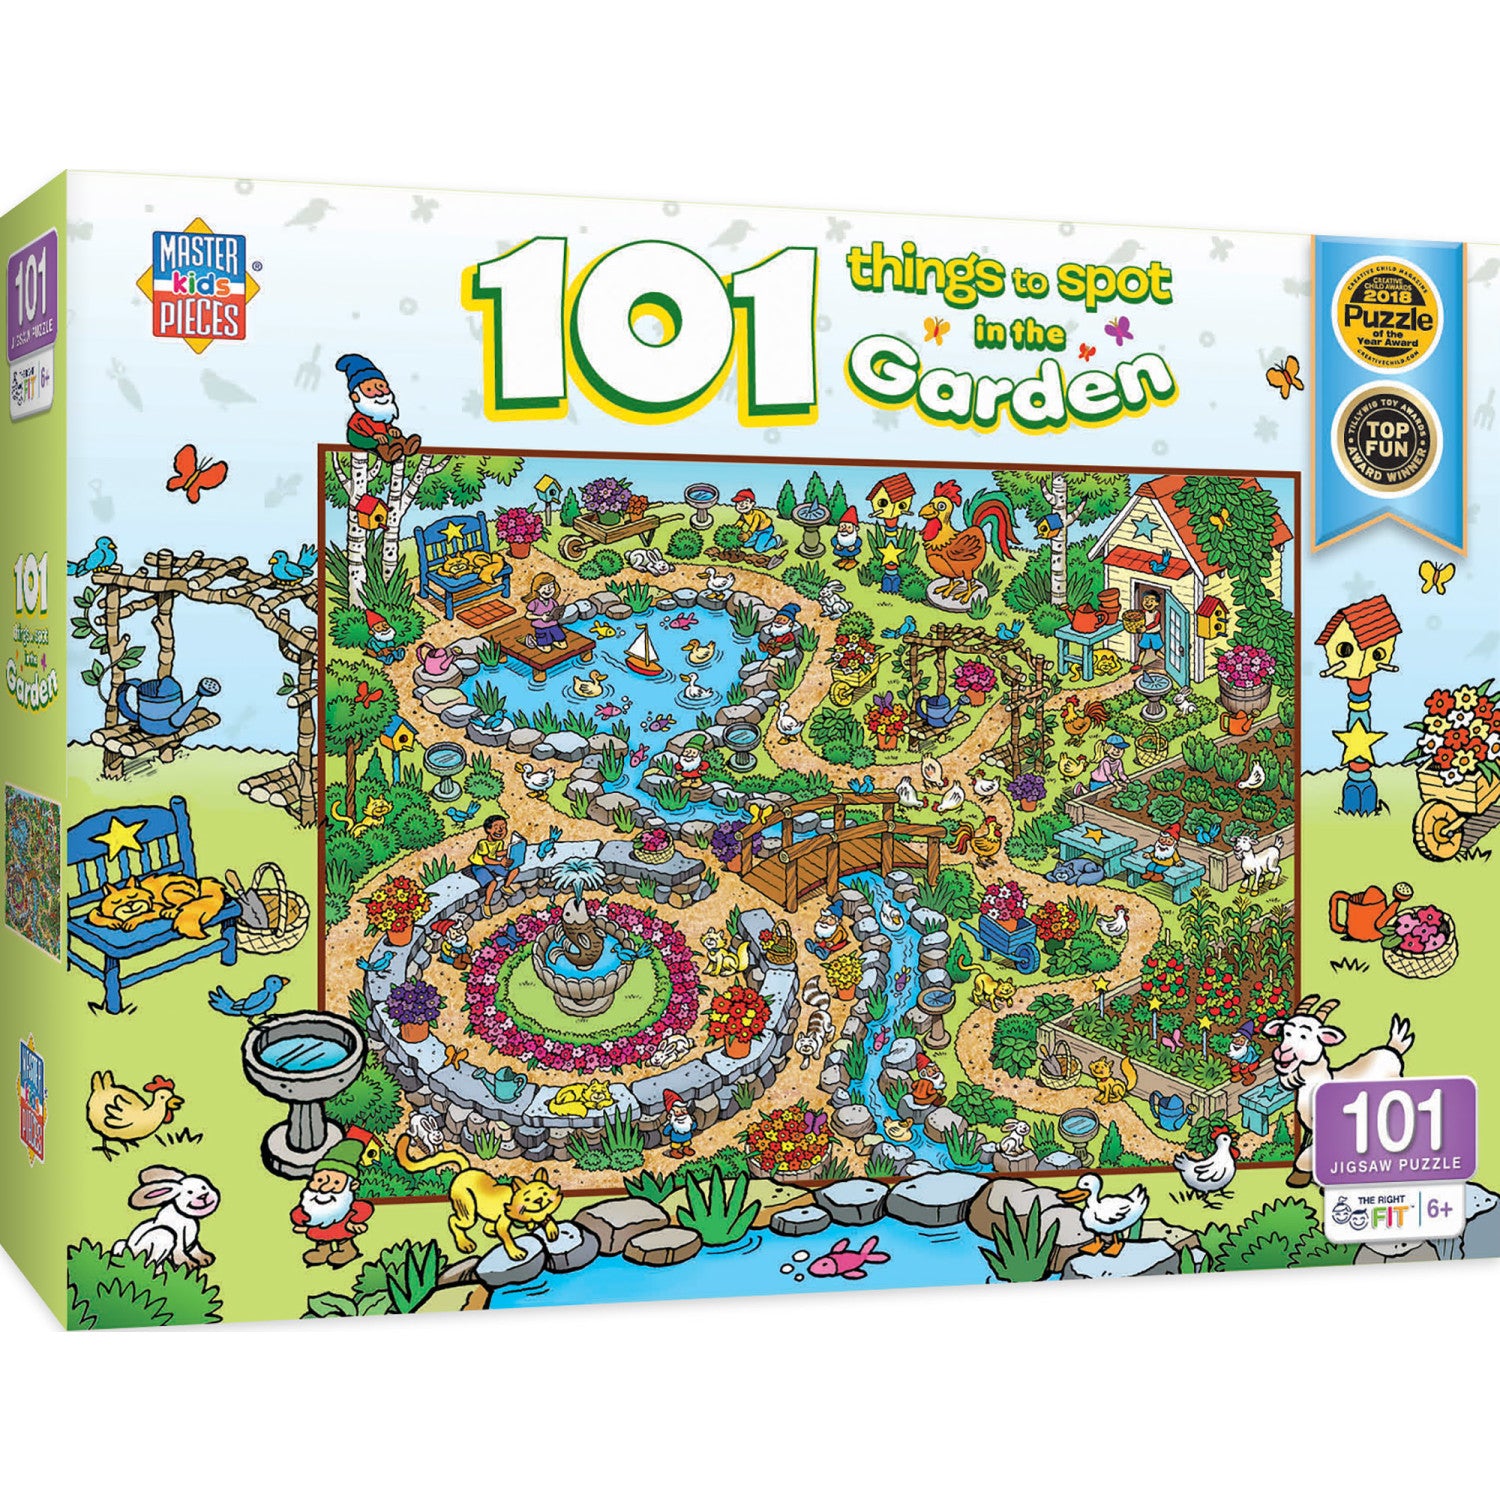 Smokey Bear 4 Pack - 100 Piece Kids Puzzle  MasterPieces – MasterPieces  Puzzle Company INC